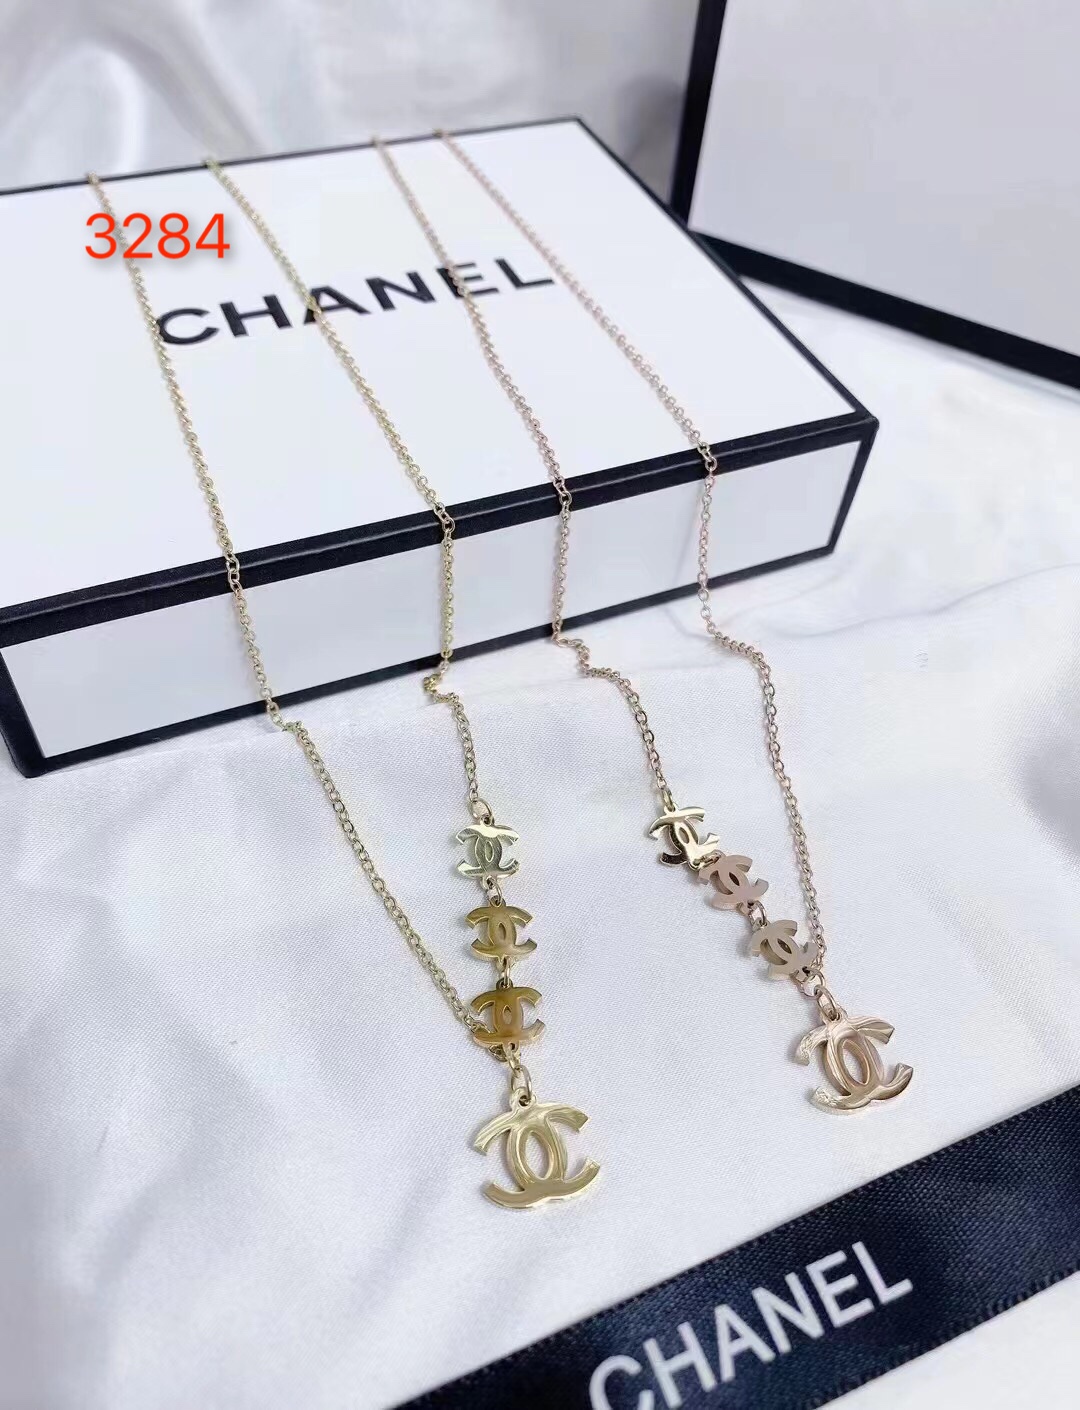 Chanel necklace 109521